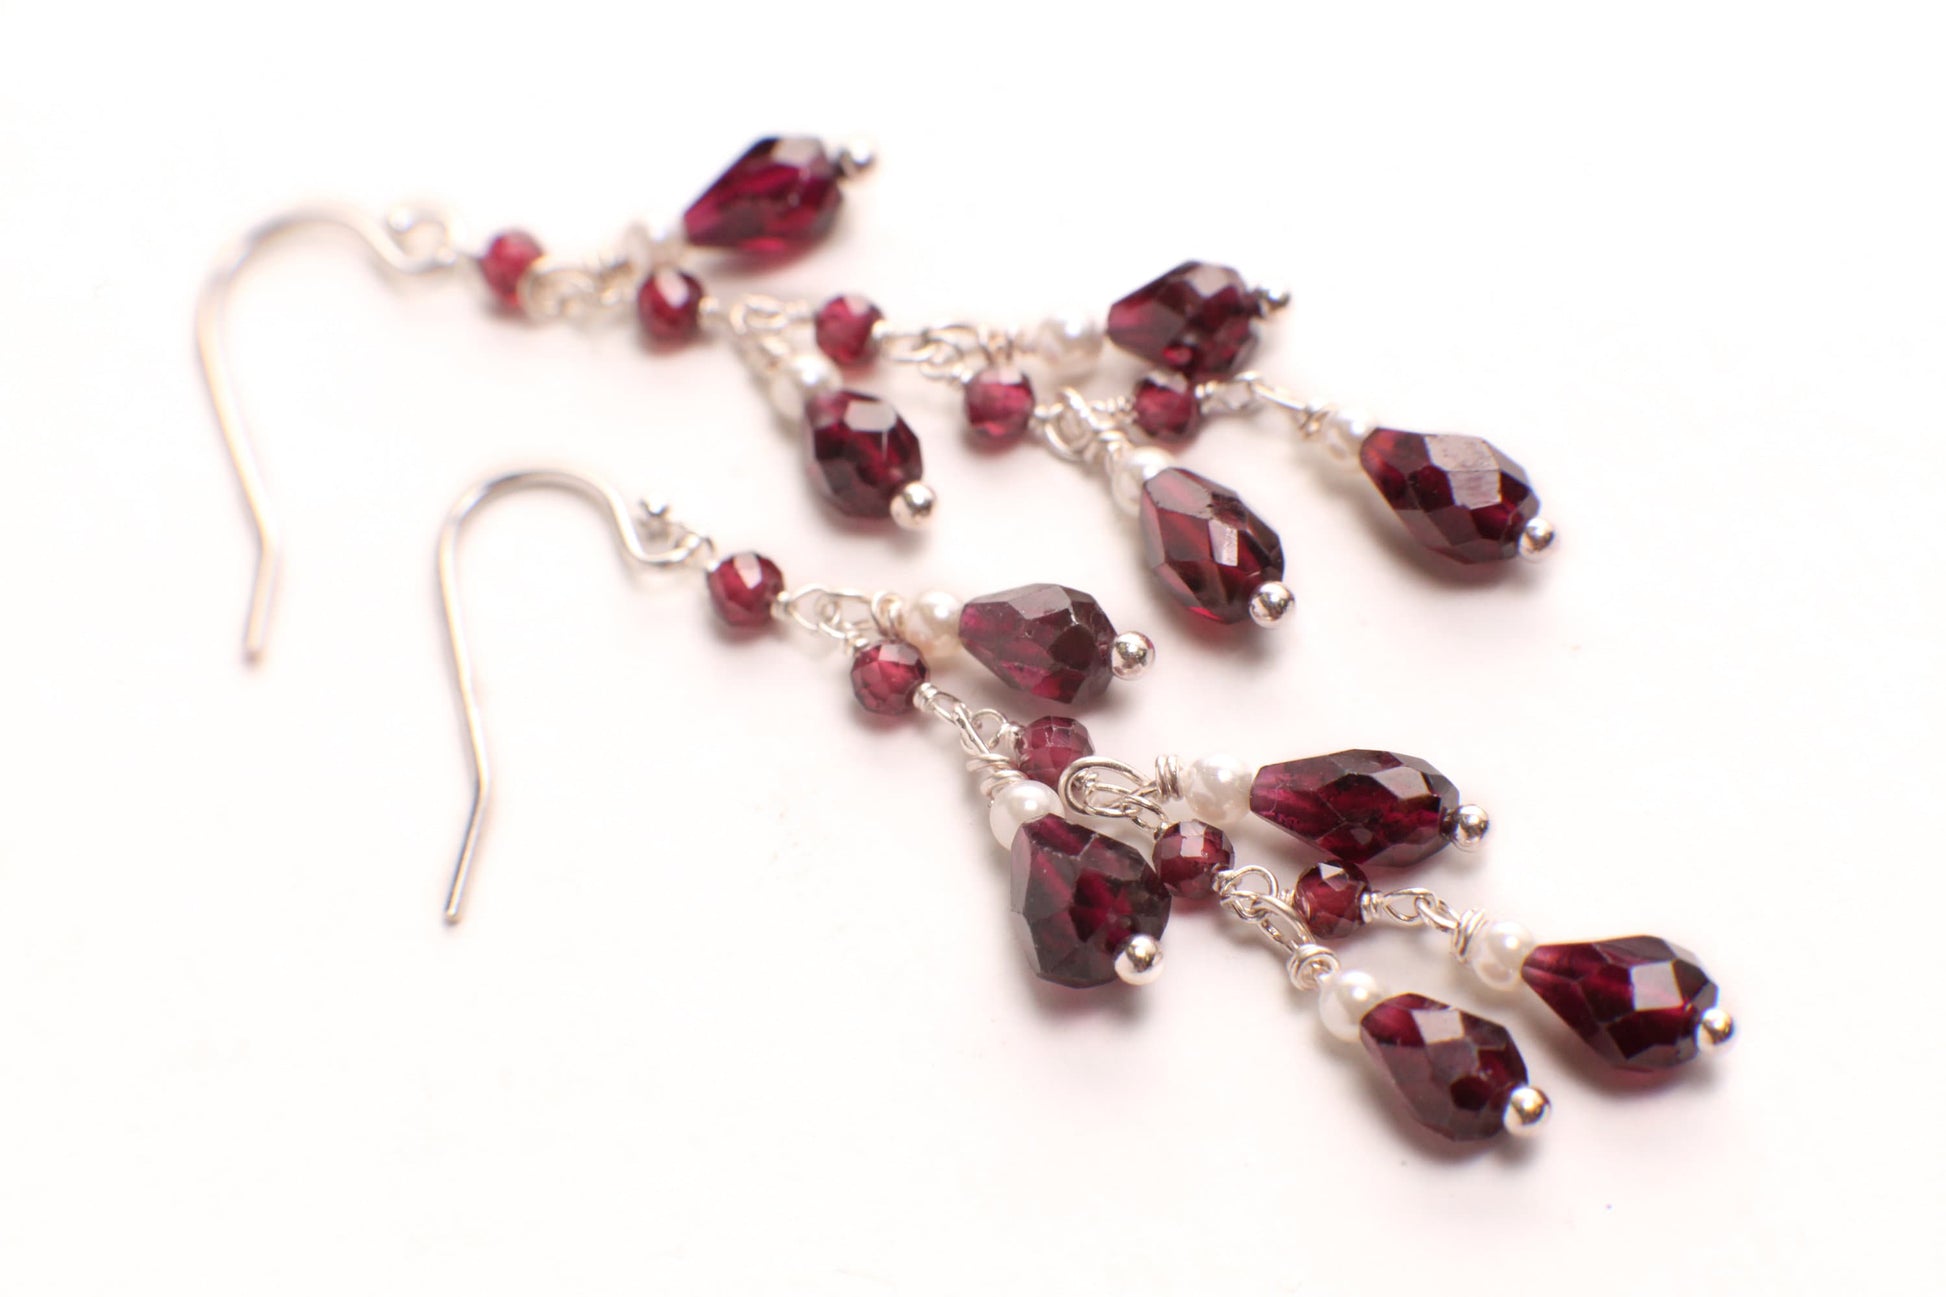 Genuine Garnet Faceted Dangling Teardrop Wire Wrapped Pearl Spacers Earrings, 925 Sterling Silver, Valentine, Bridesmaid, Gift For Her